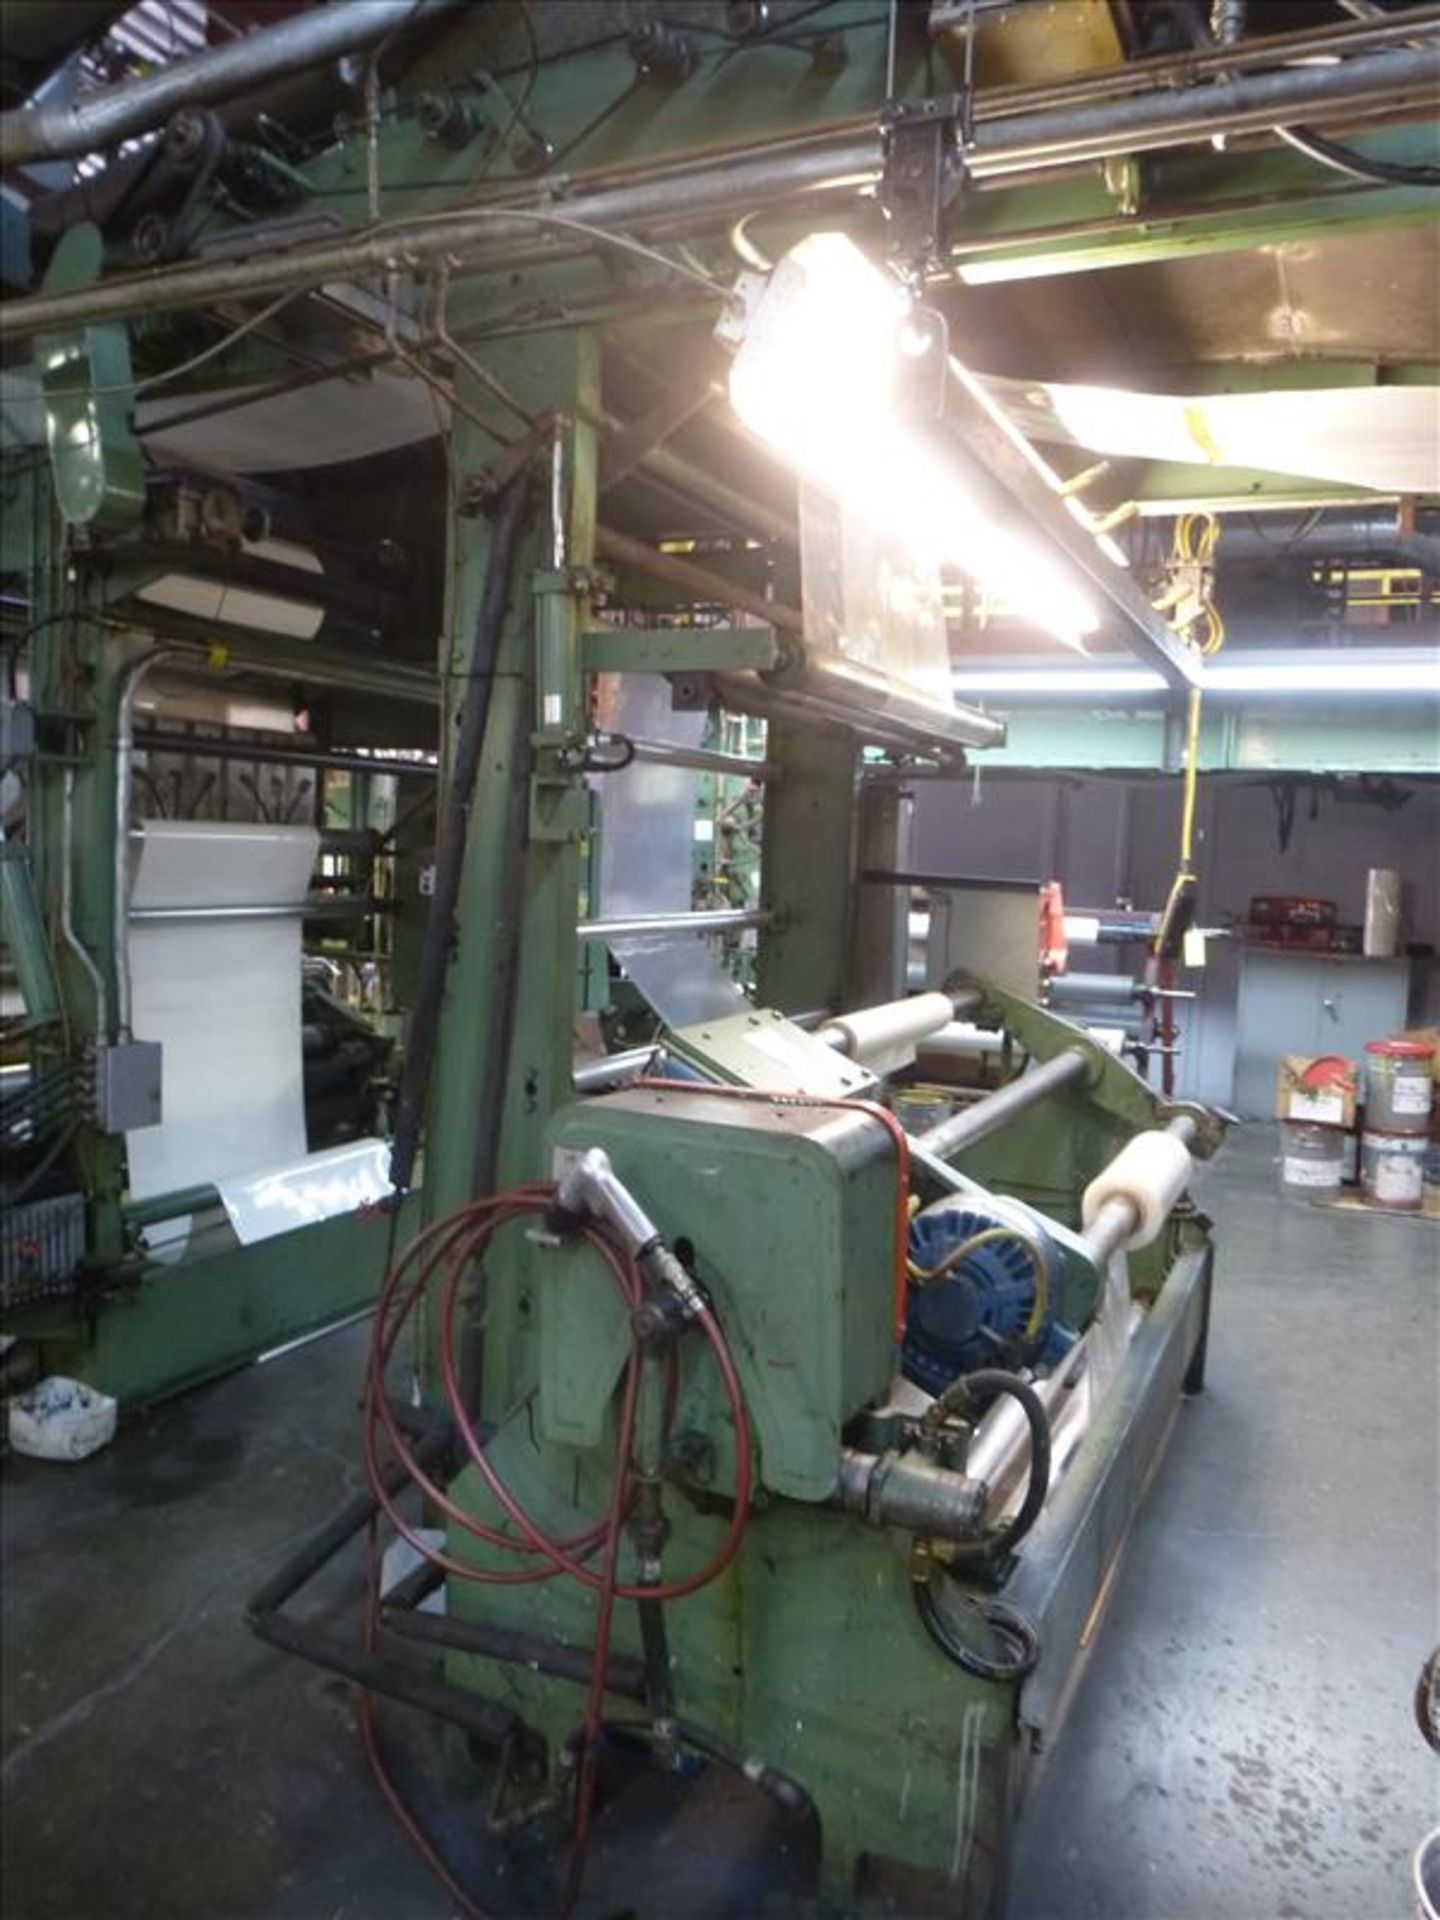 PCMC (Paper Converting Machine Co.) 6-colour central impression flexographic printing press, 56" - Image 9 of 30